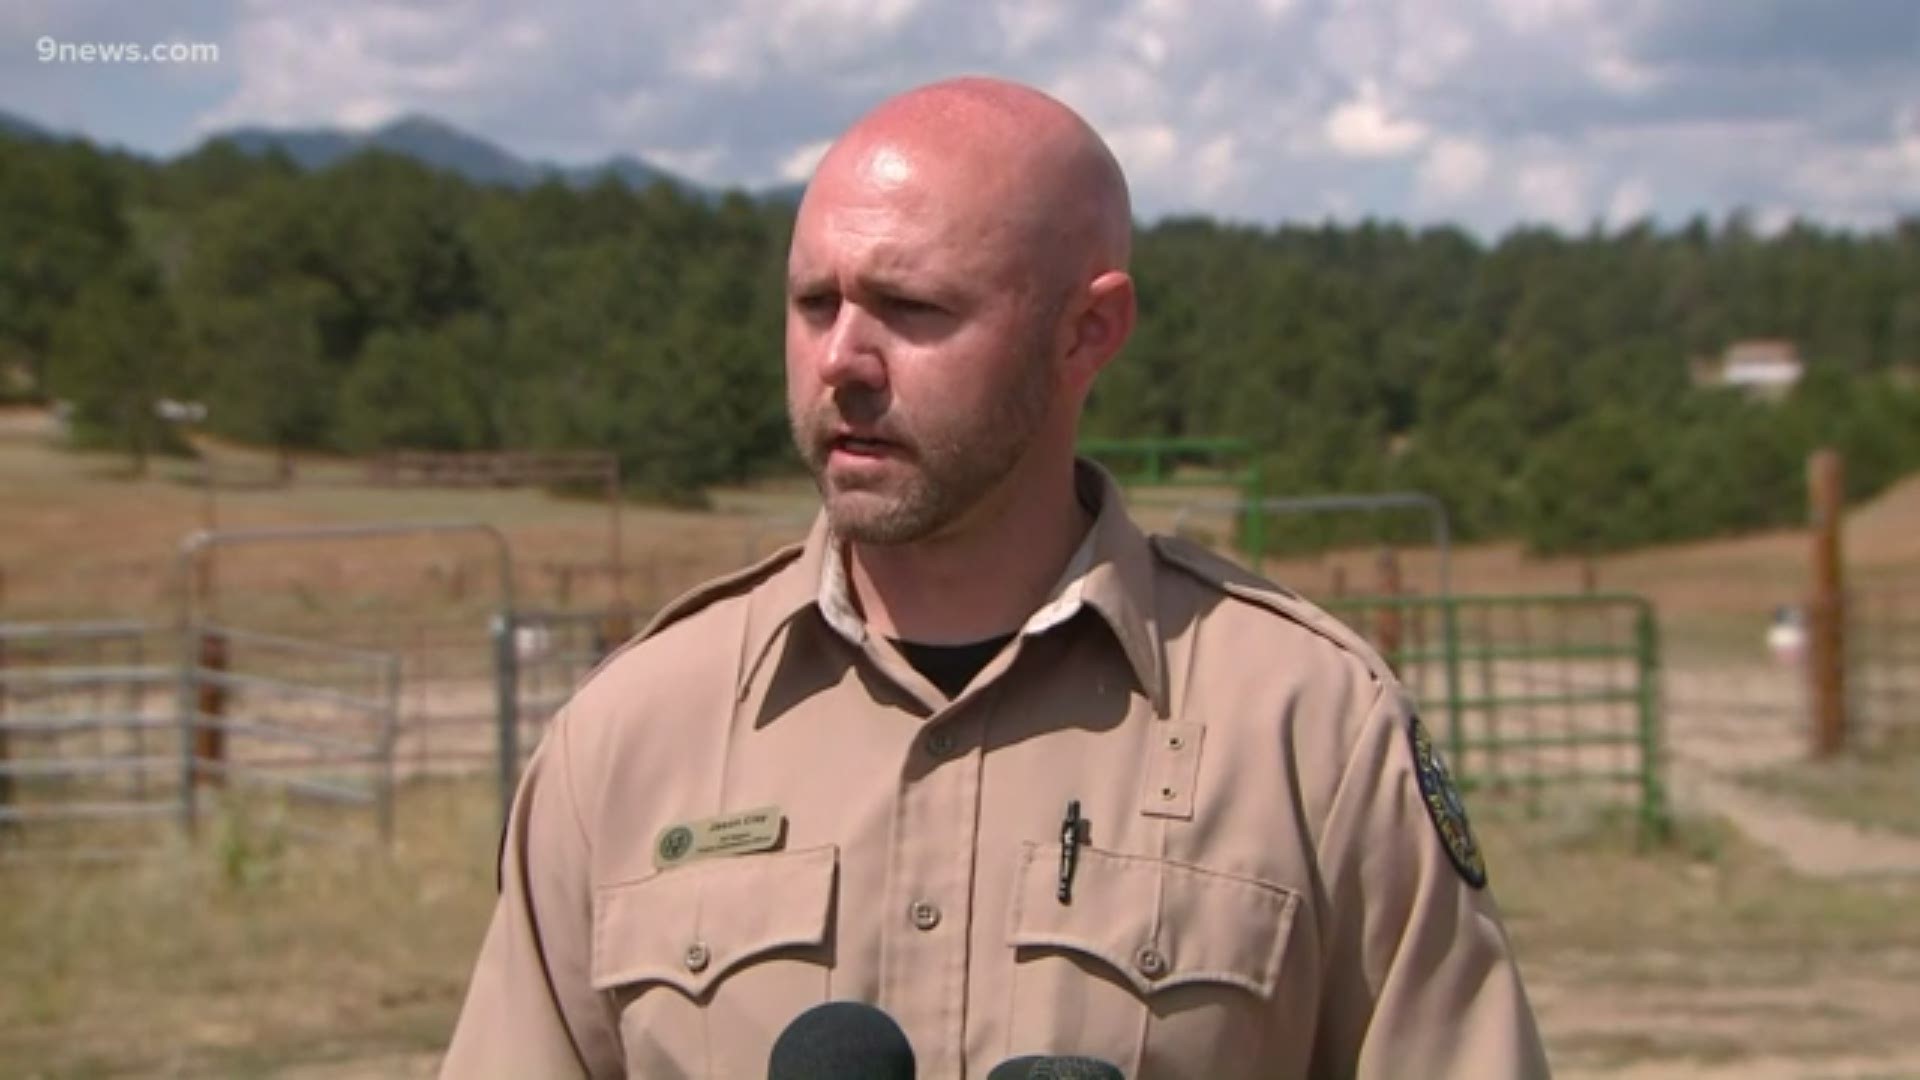 CPW spokesperson Jason Clay provides an update about an 8-year-old boy that was attacked by a mountain lion in Bailey Wednesday night.